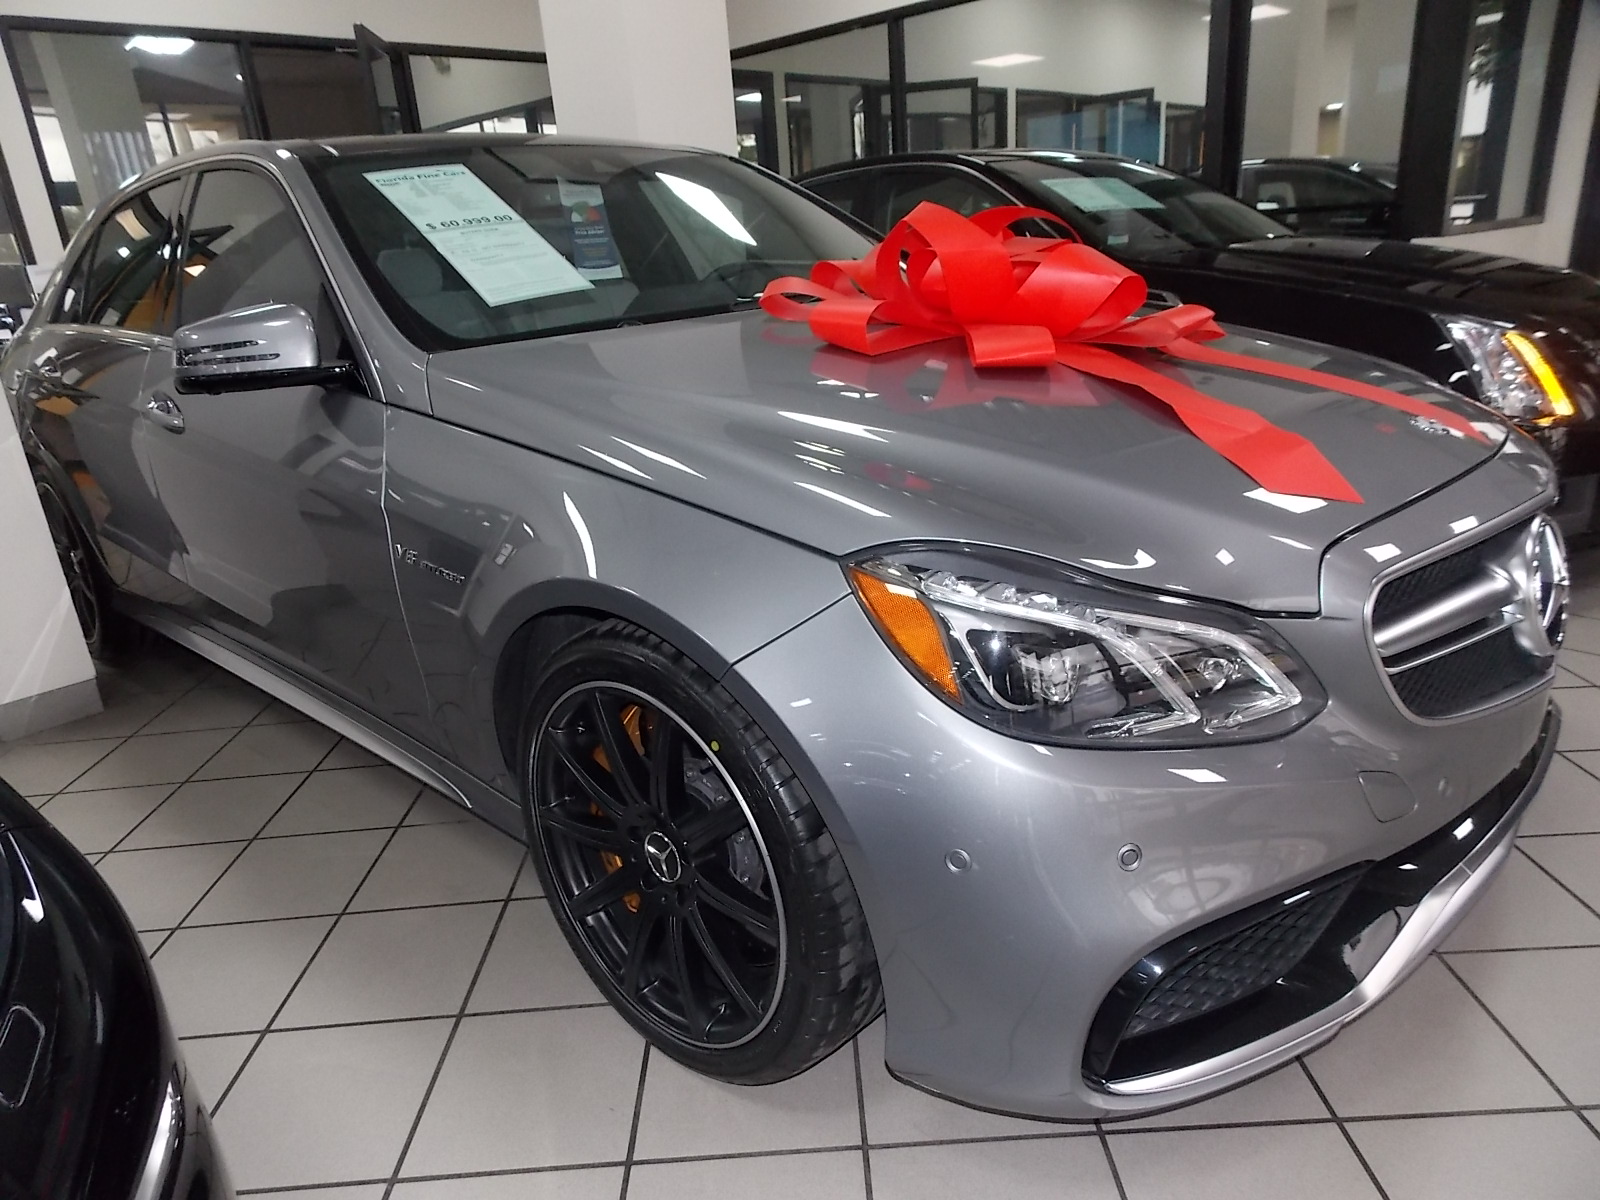 Looking for a used Mercedes? Visit Florida Fine Cars in West Palm Beach, Hollywood and Miami for a huge selection.